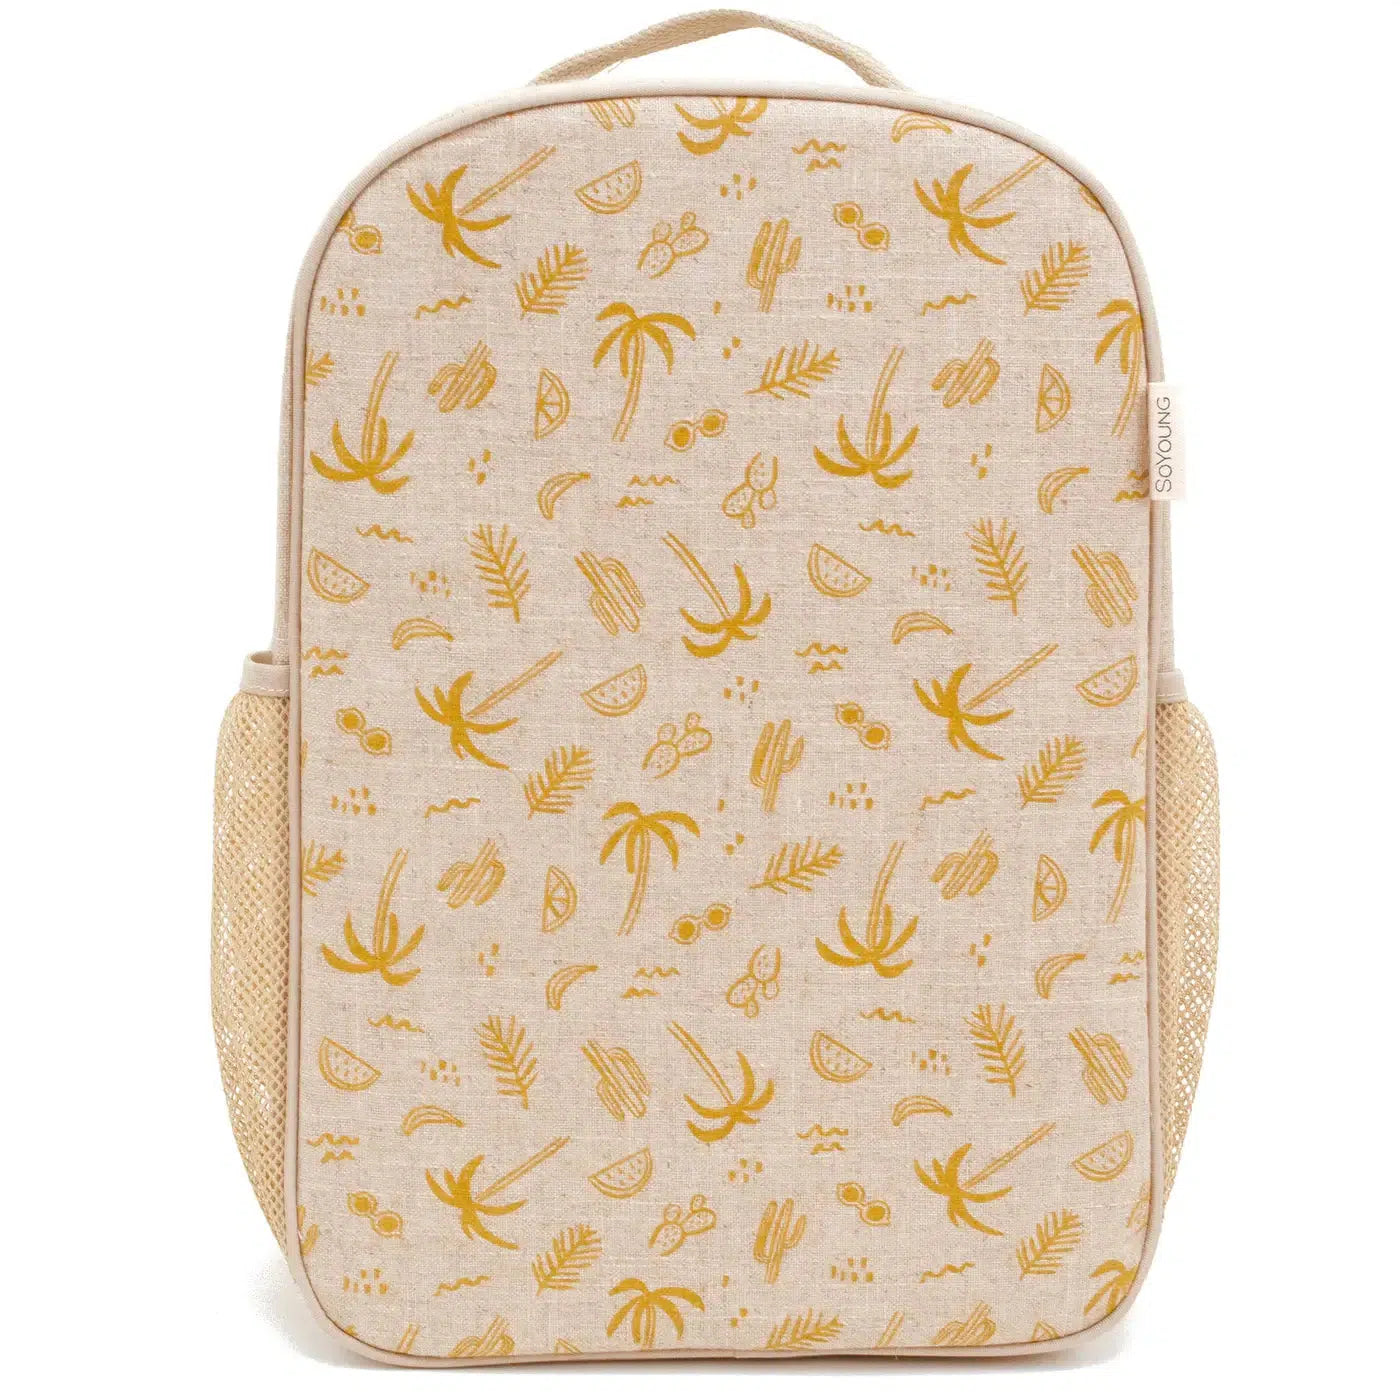 Sunkissed Backpack by SoYoung on the go SoYoung Prettycleanshop